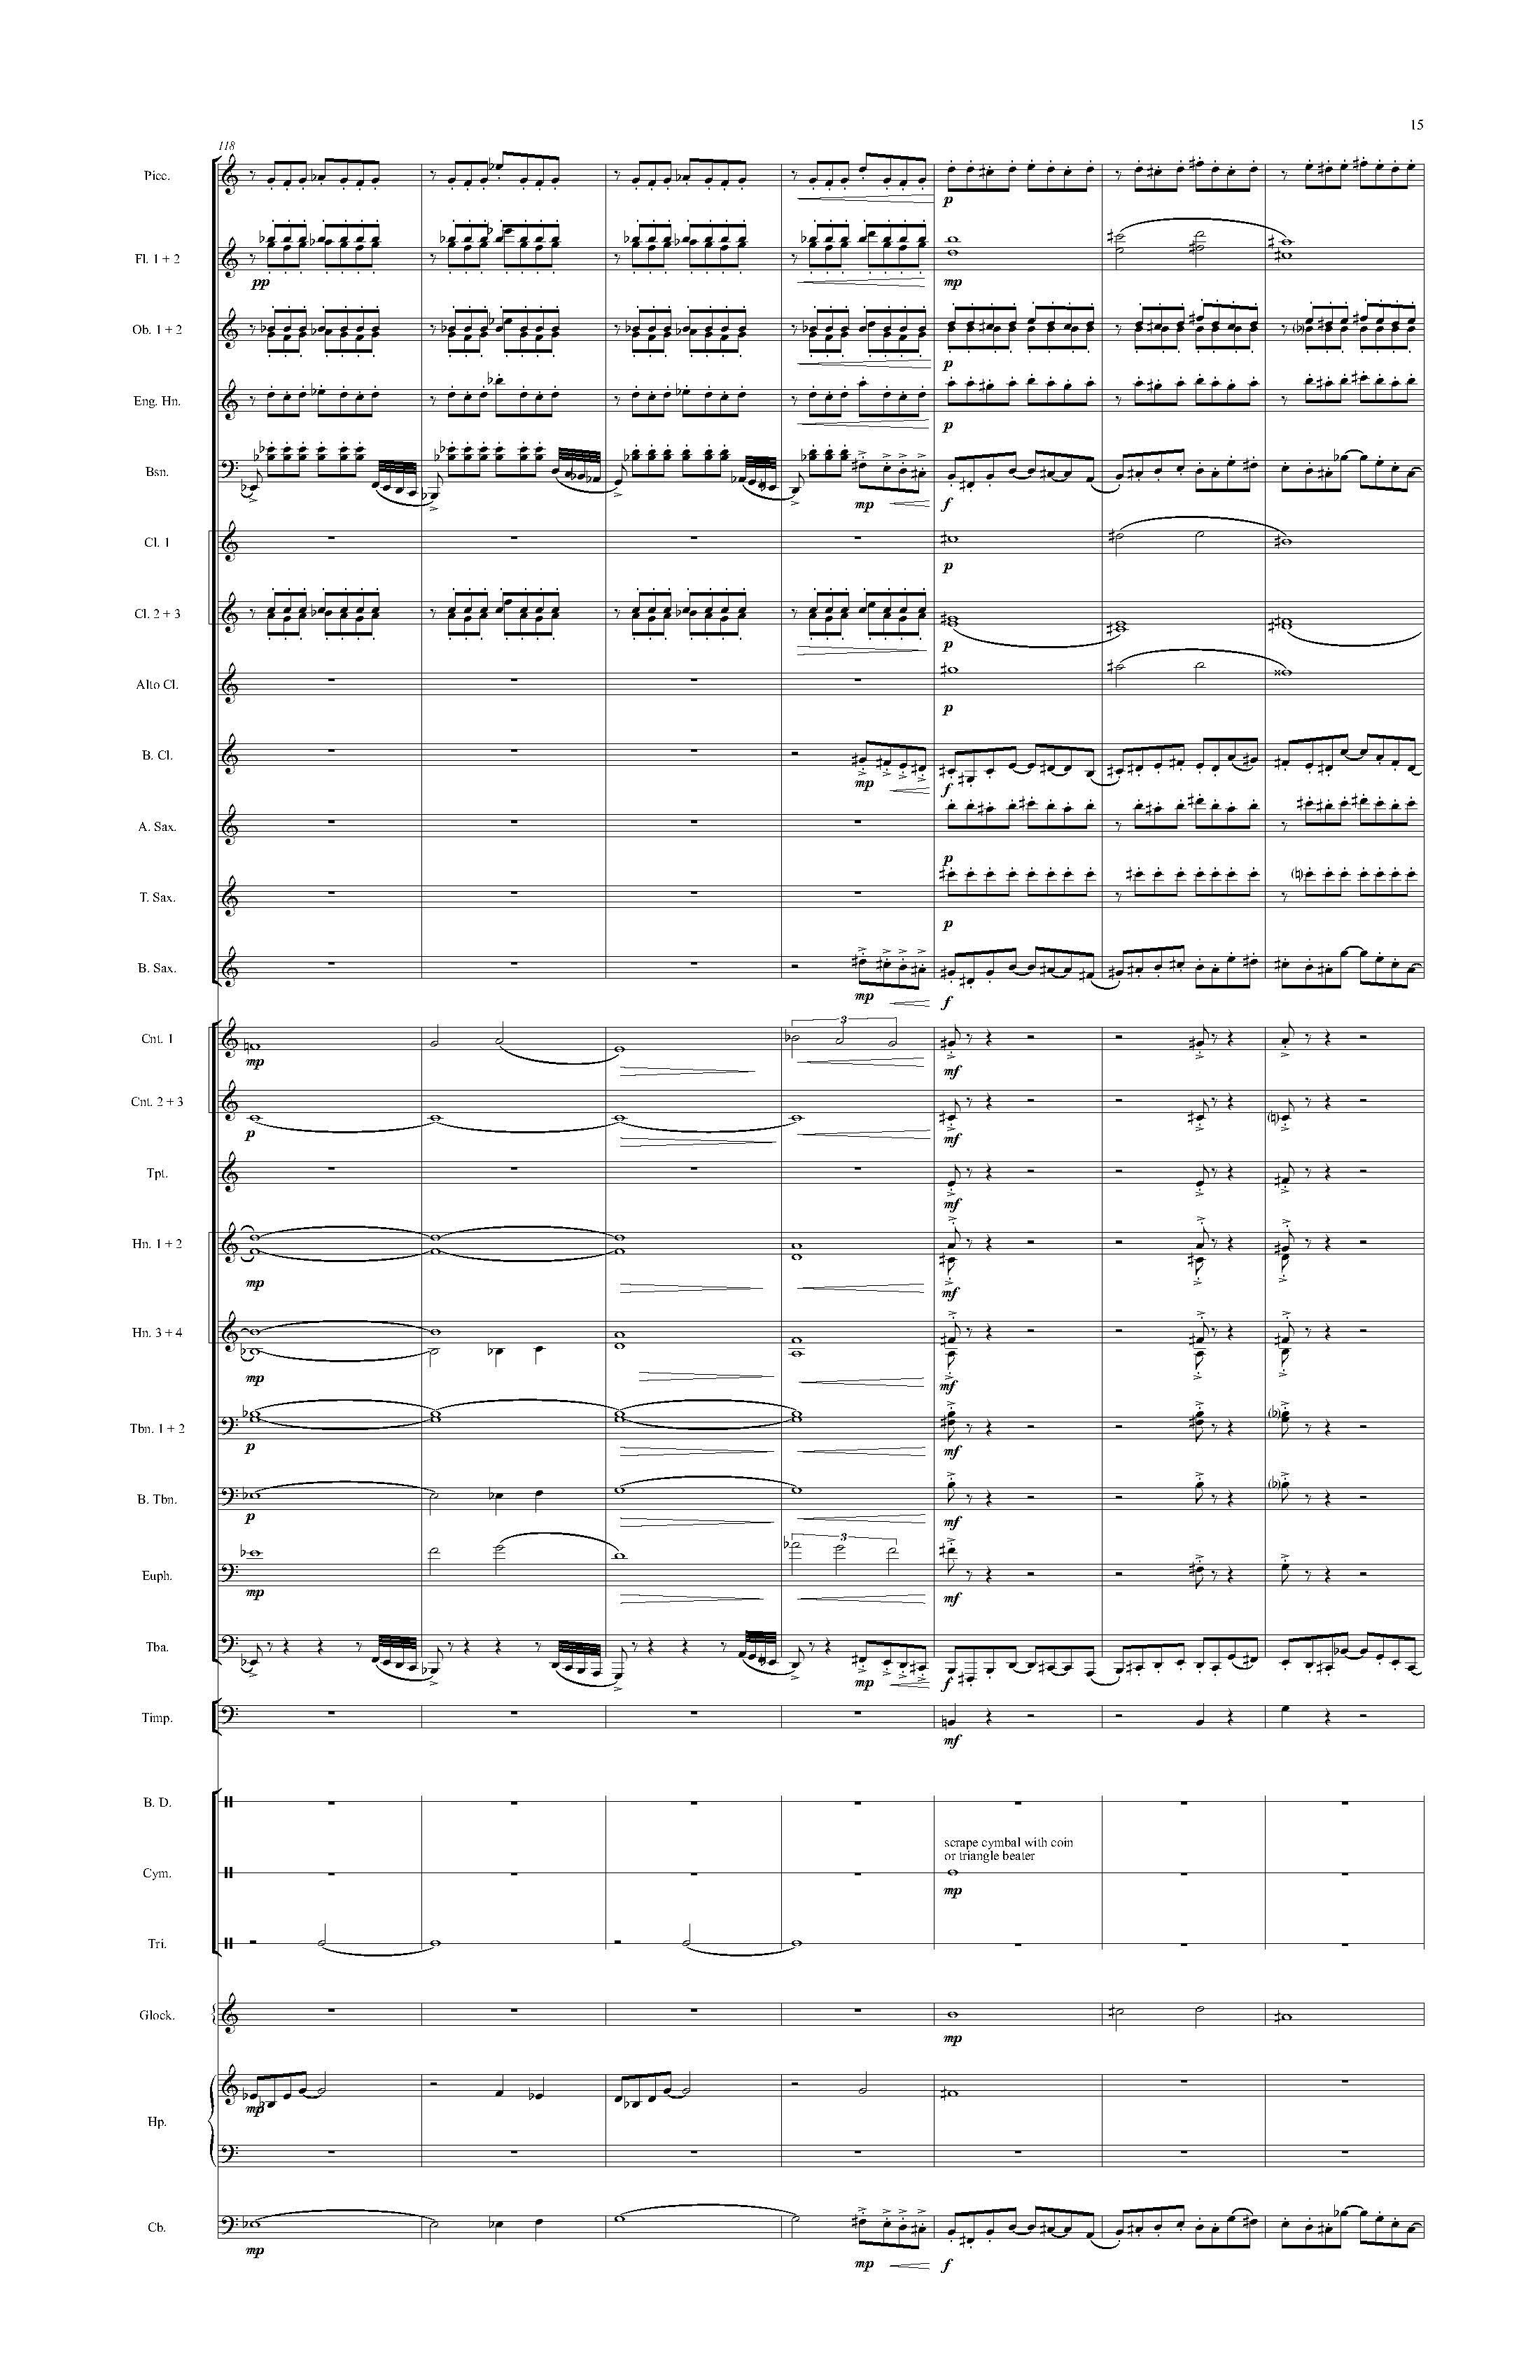 Psyche - Complete Score_Page_21.jpg